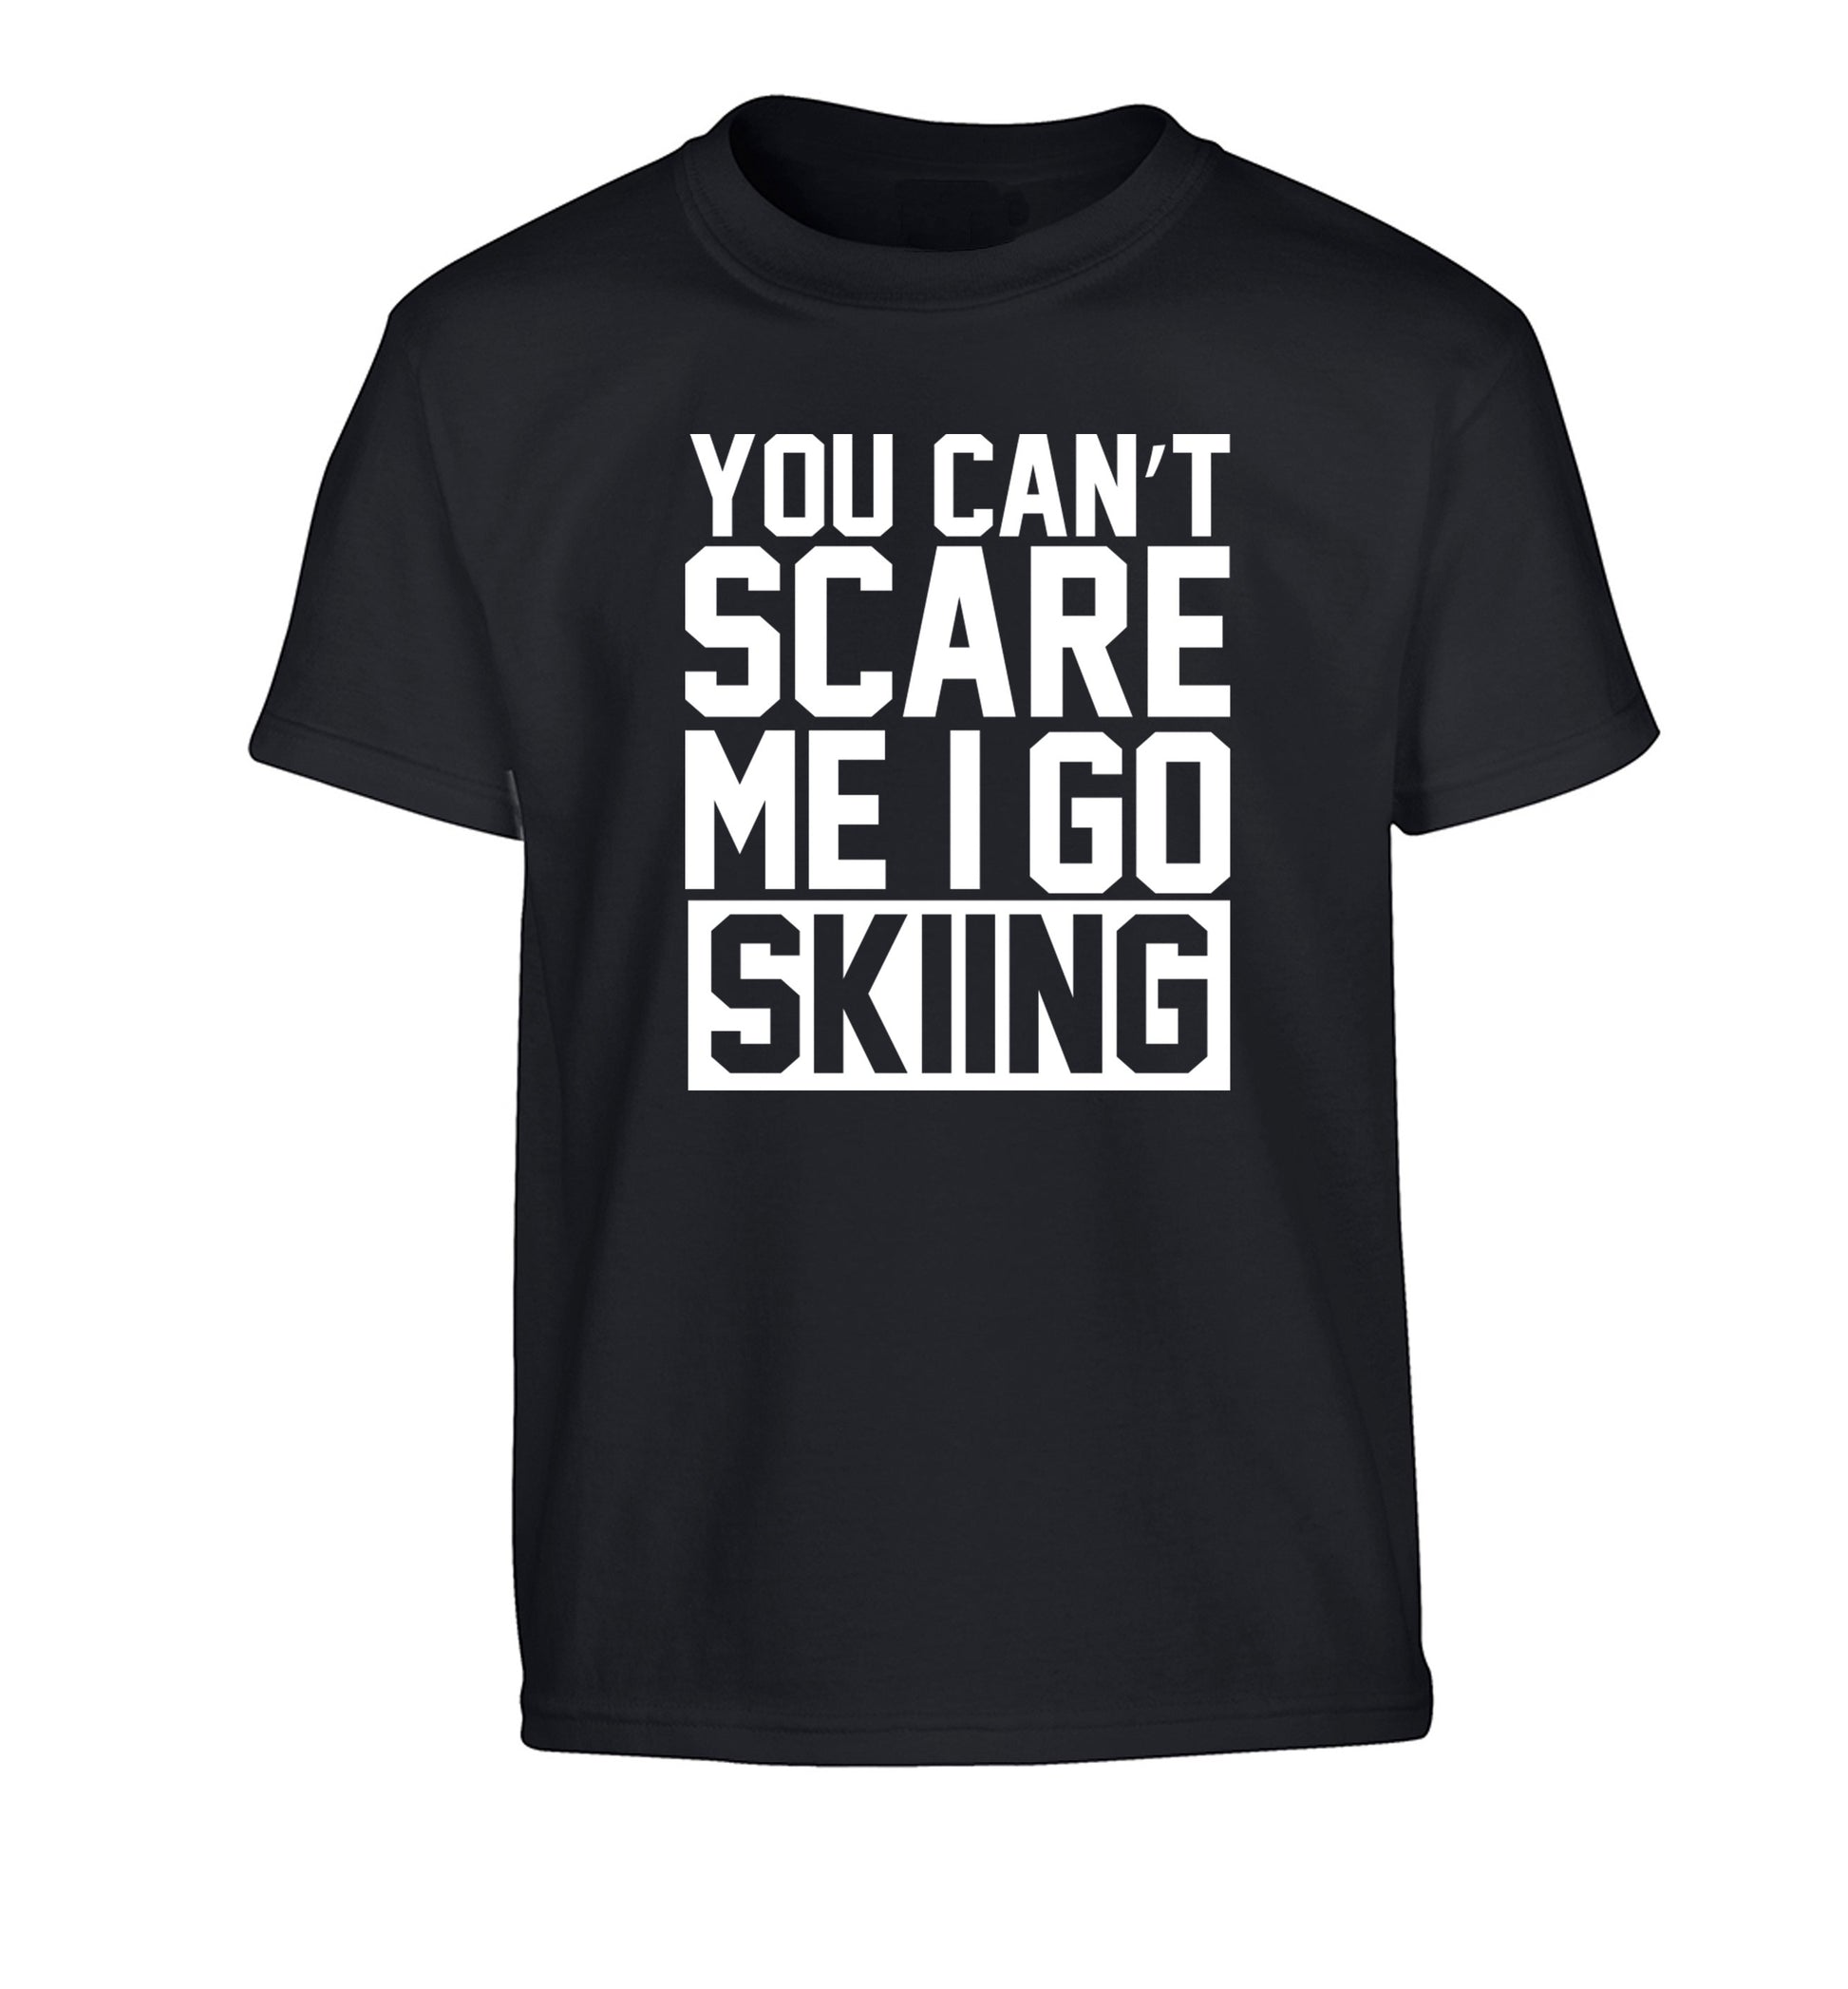 You can't scare me I go skiing Children's black Tshirt 12-14 Years